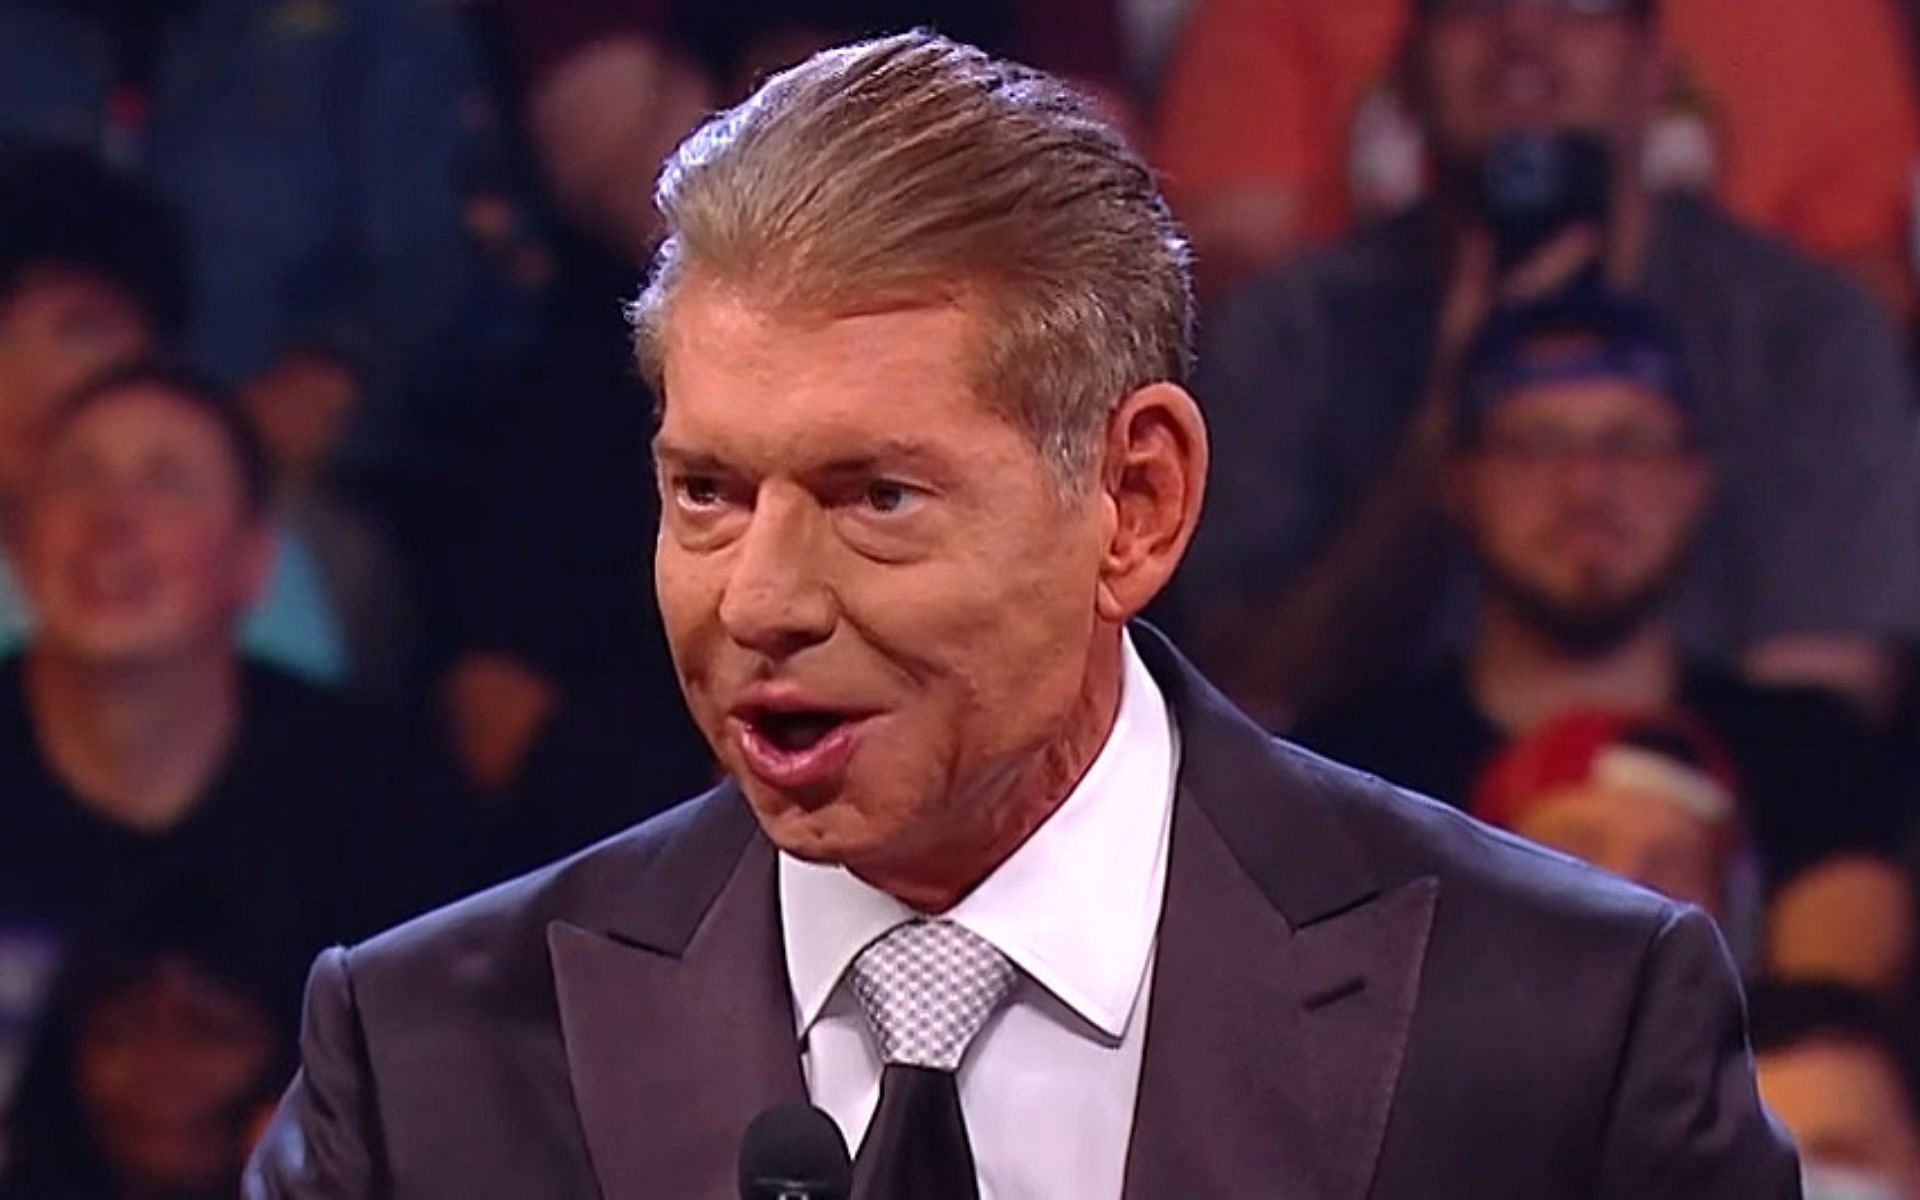 McMahon is the Executive Chairman of WWE